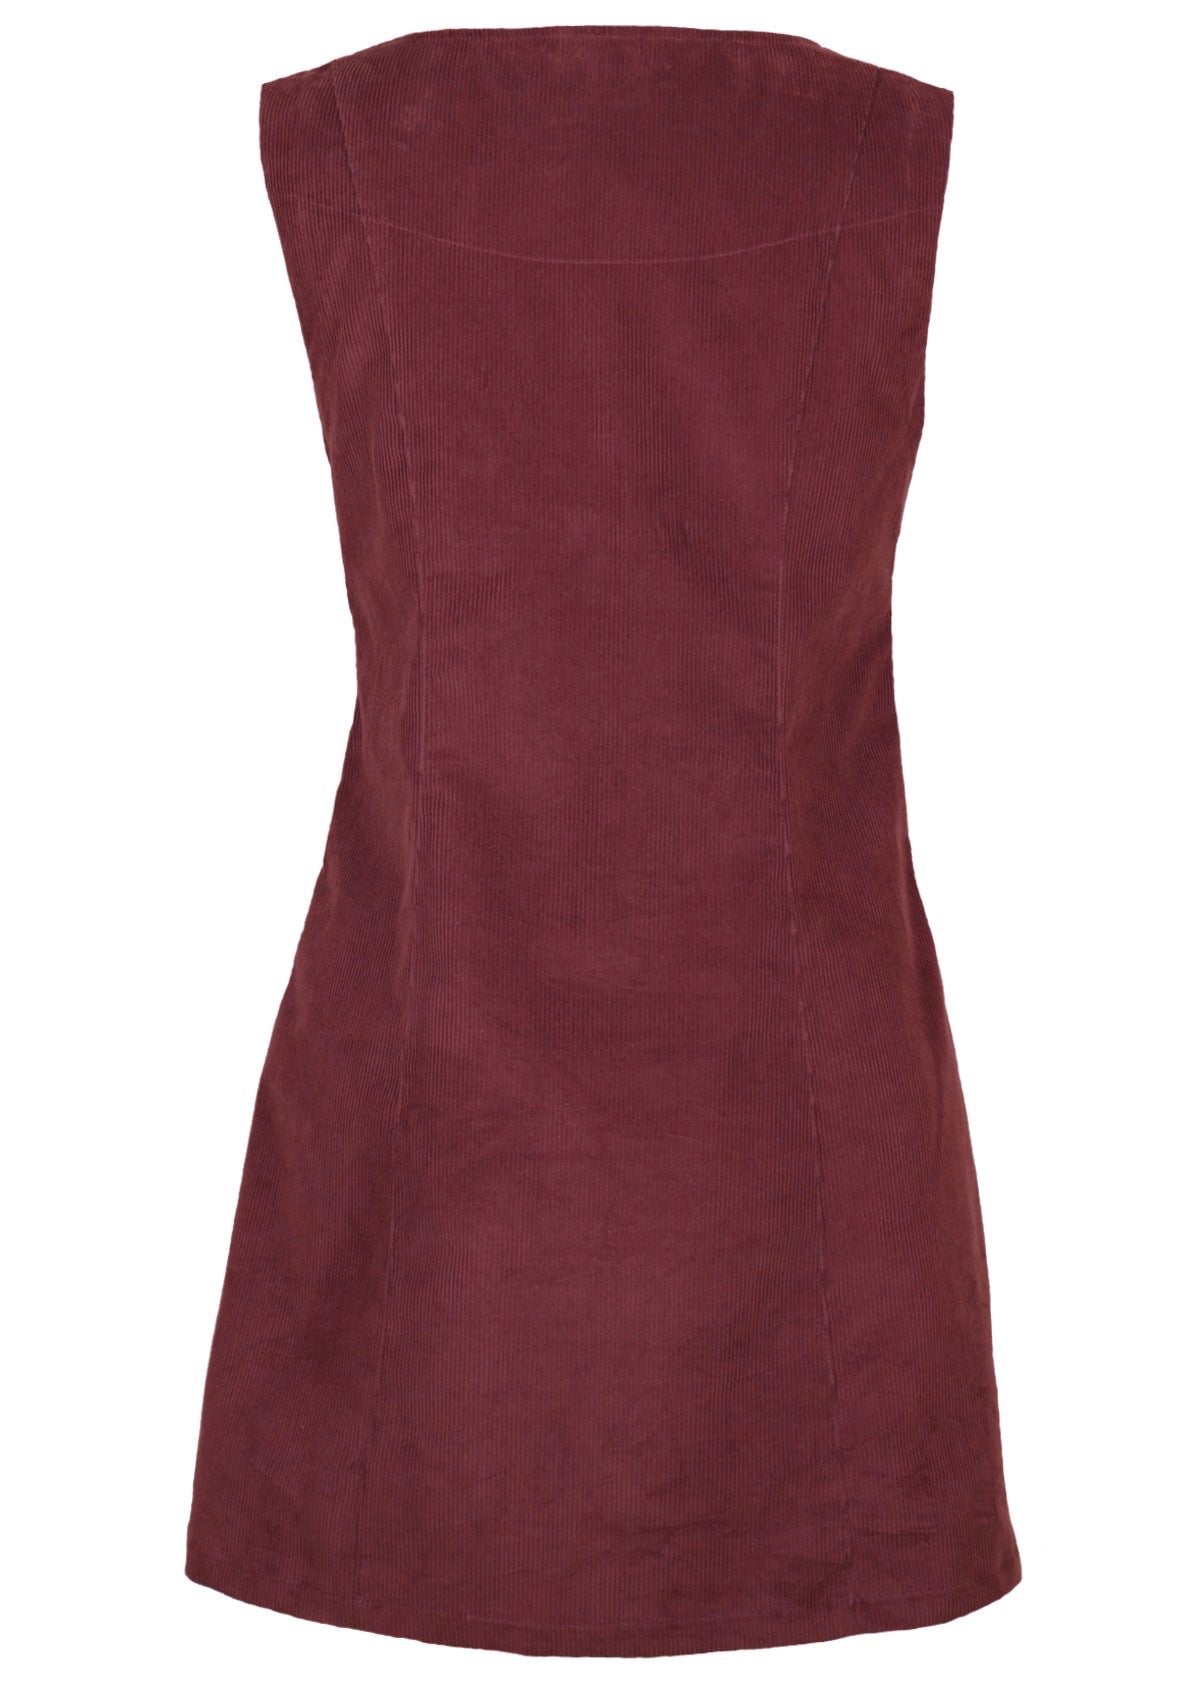 Sleeveless fitted 100% cotton corduroy tunic features pockets. 